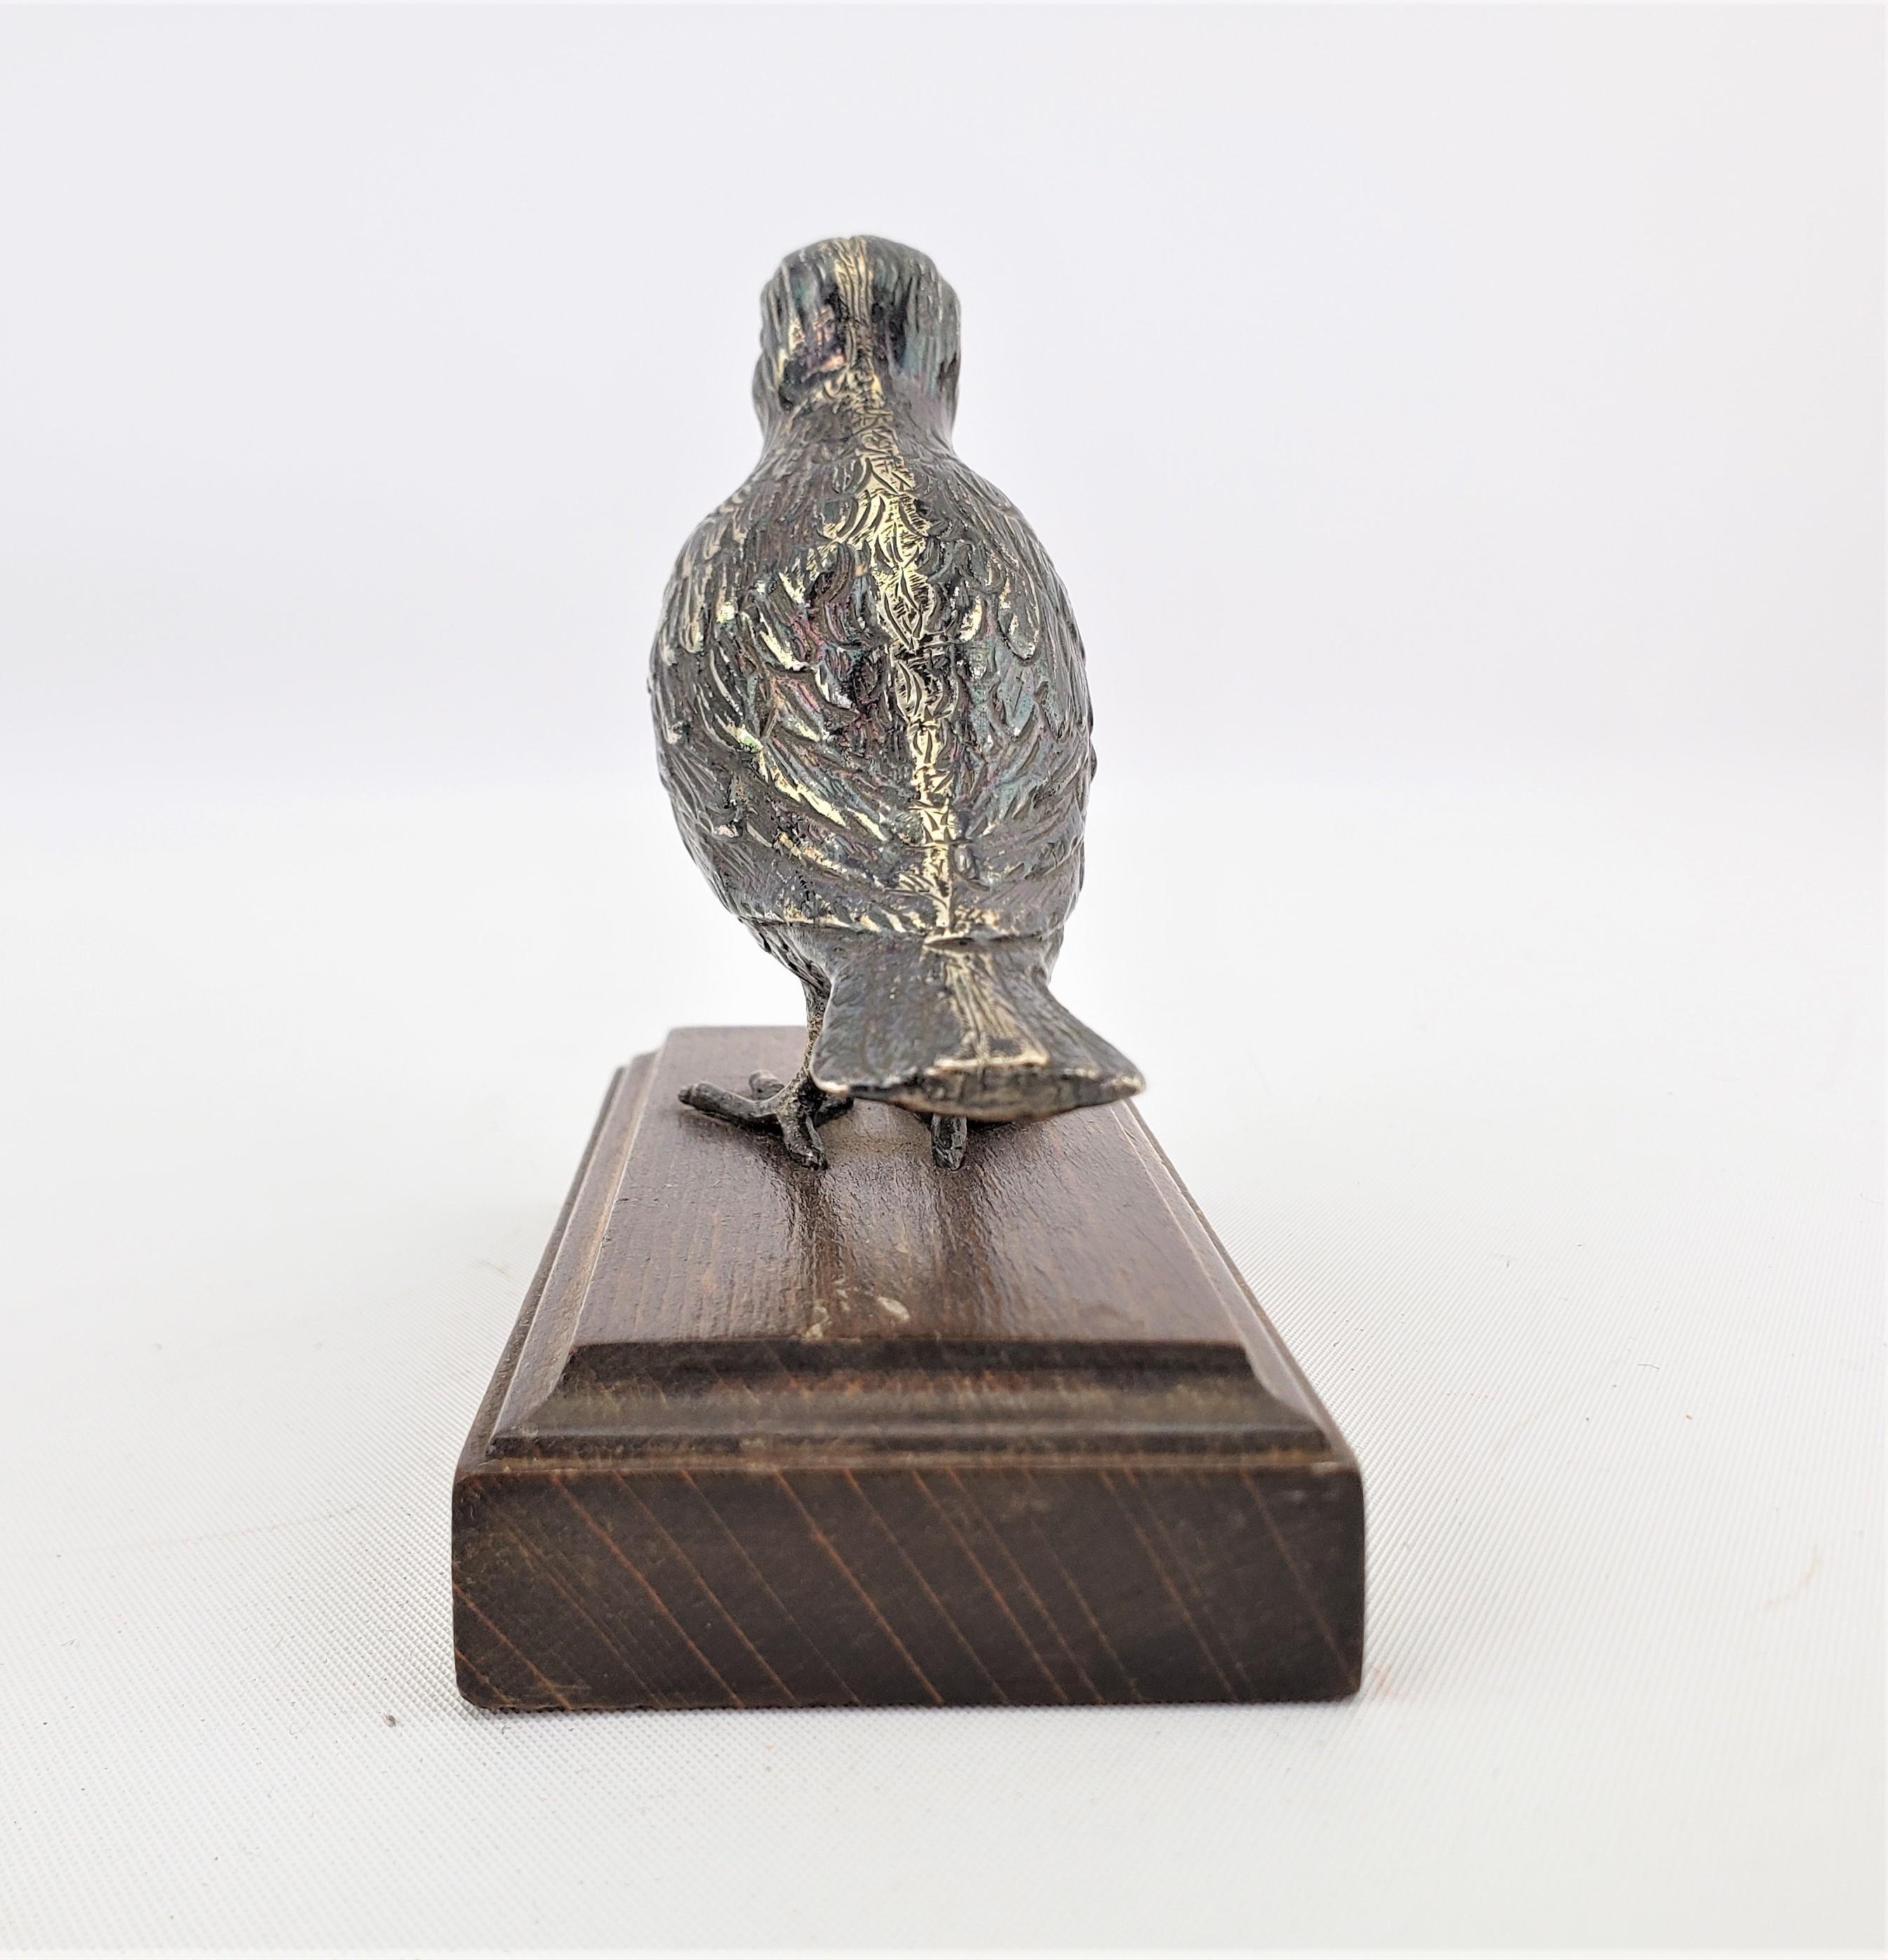 Antique Cast Continental Silver Bird Sculpture on a Wooden Base In Good Condition For Sale In Hamilton, Ontario